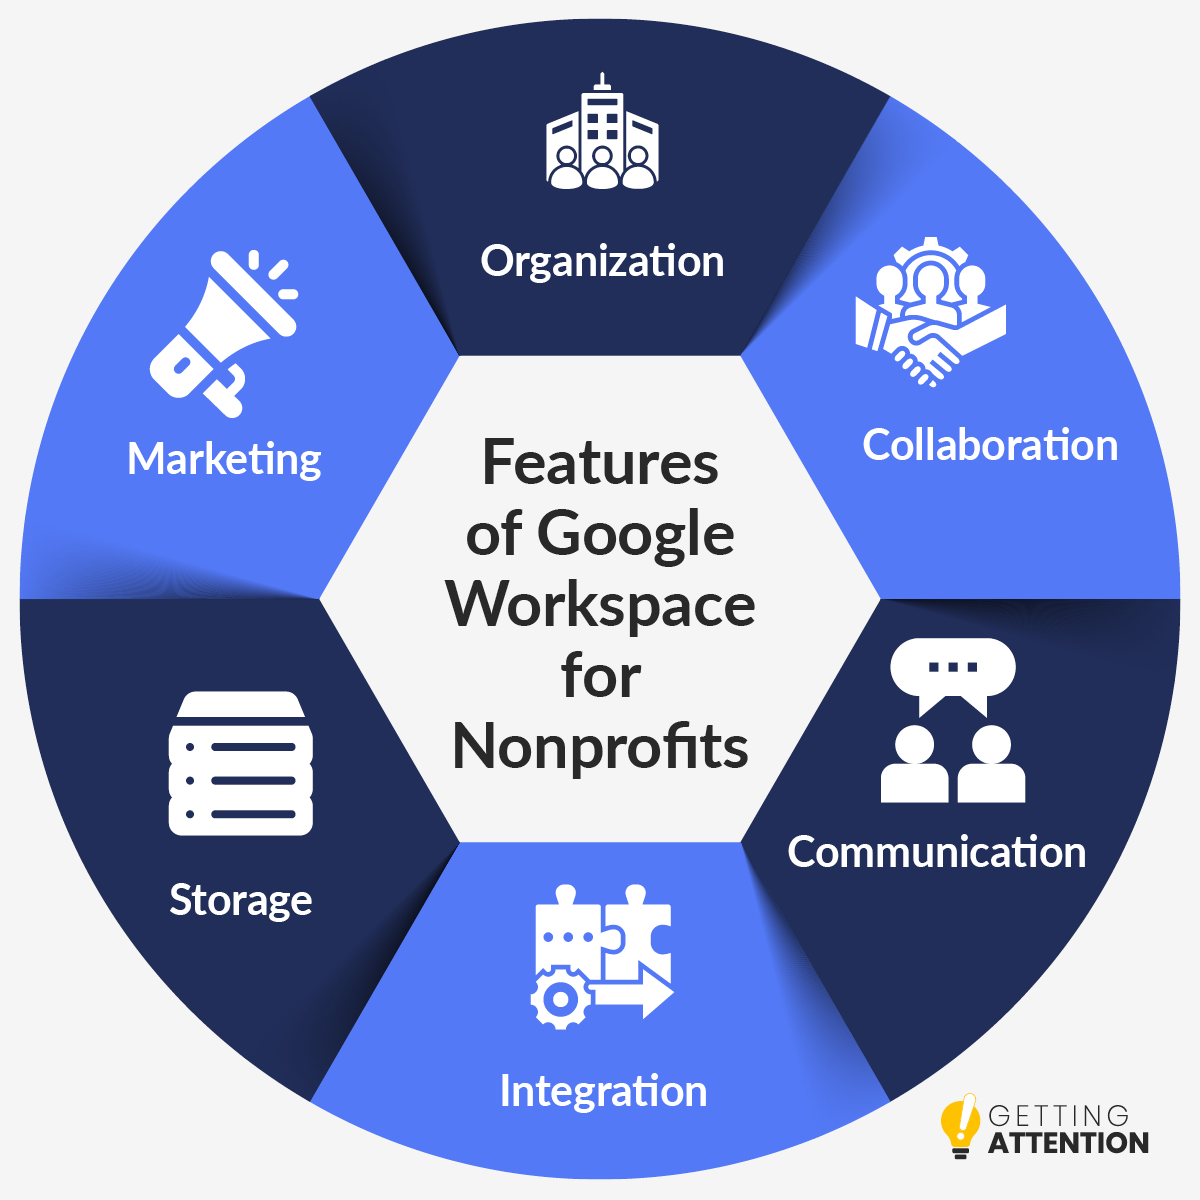 This image shows the key features of using Google Workspace for nonprofits, covered in more detail in the text below.